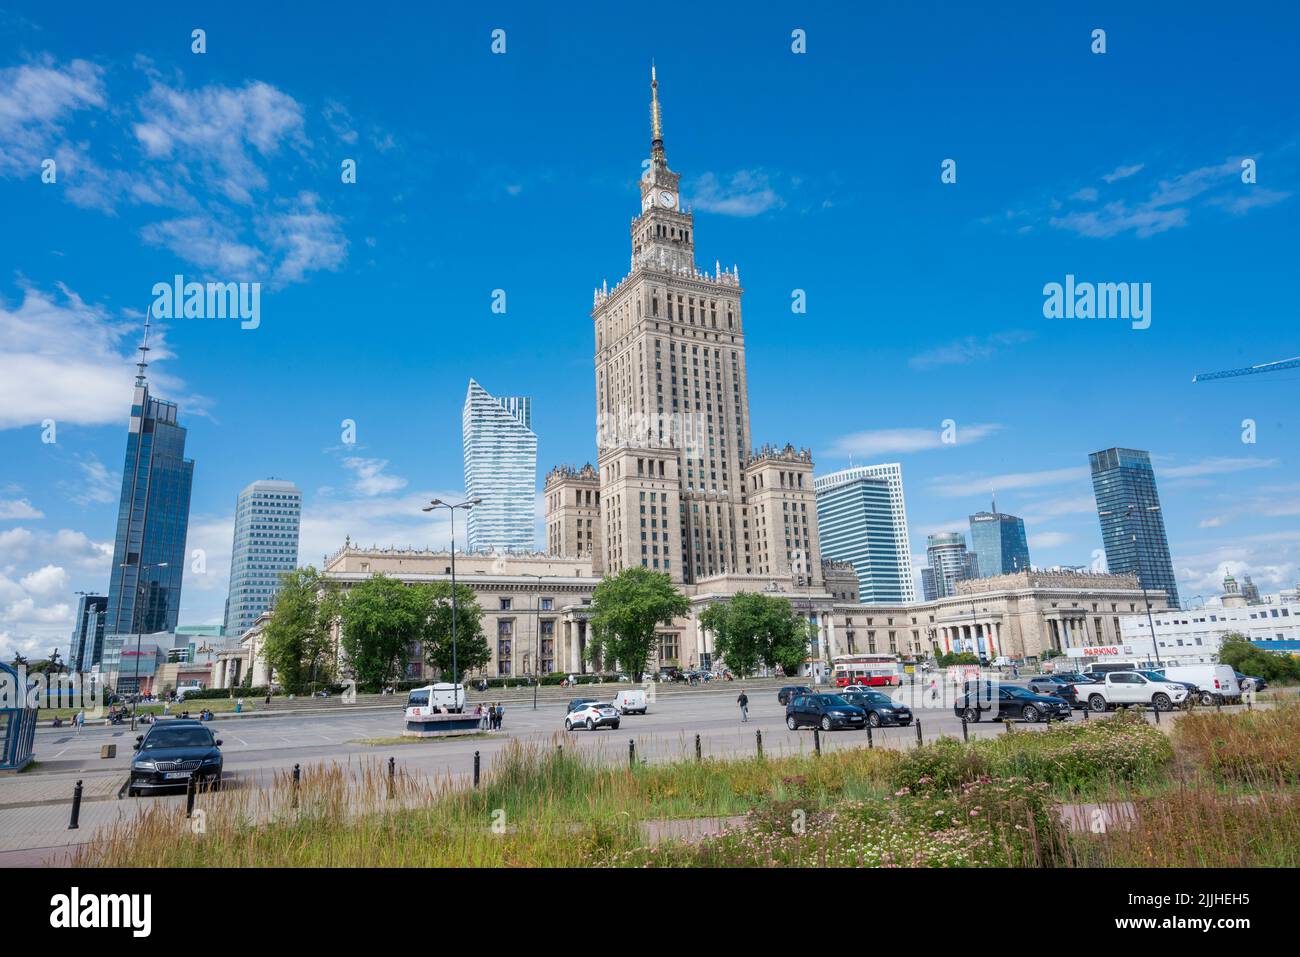 Warsaw Poland - January 2, 2021, house of culture and science in the city center Stock Photo